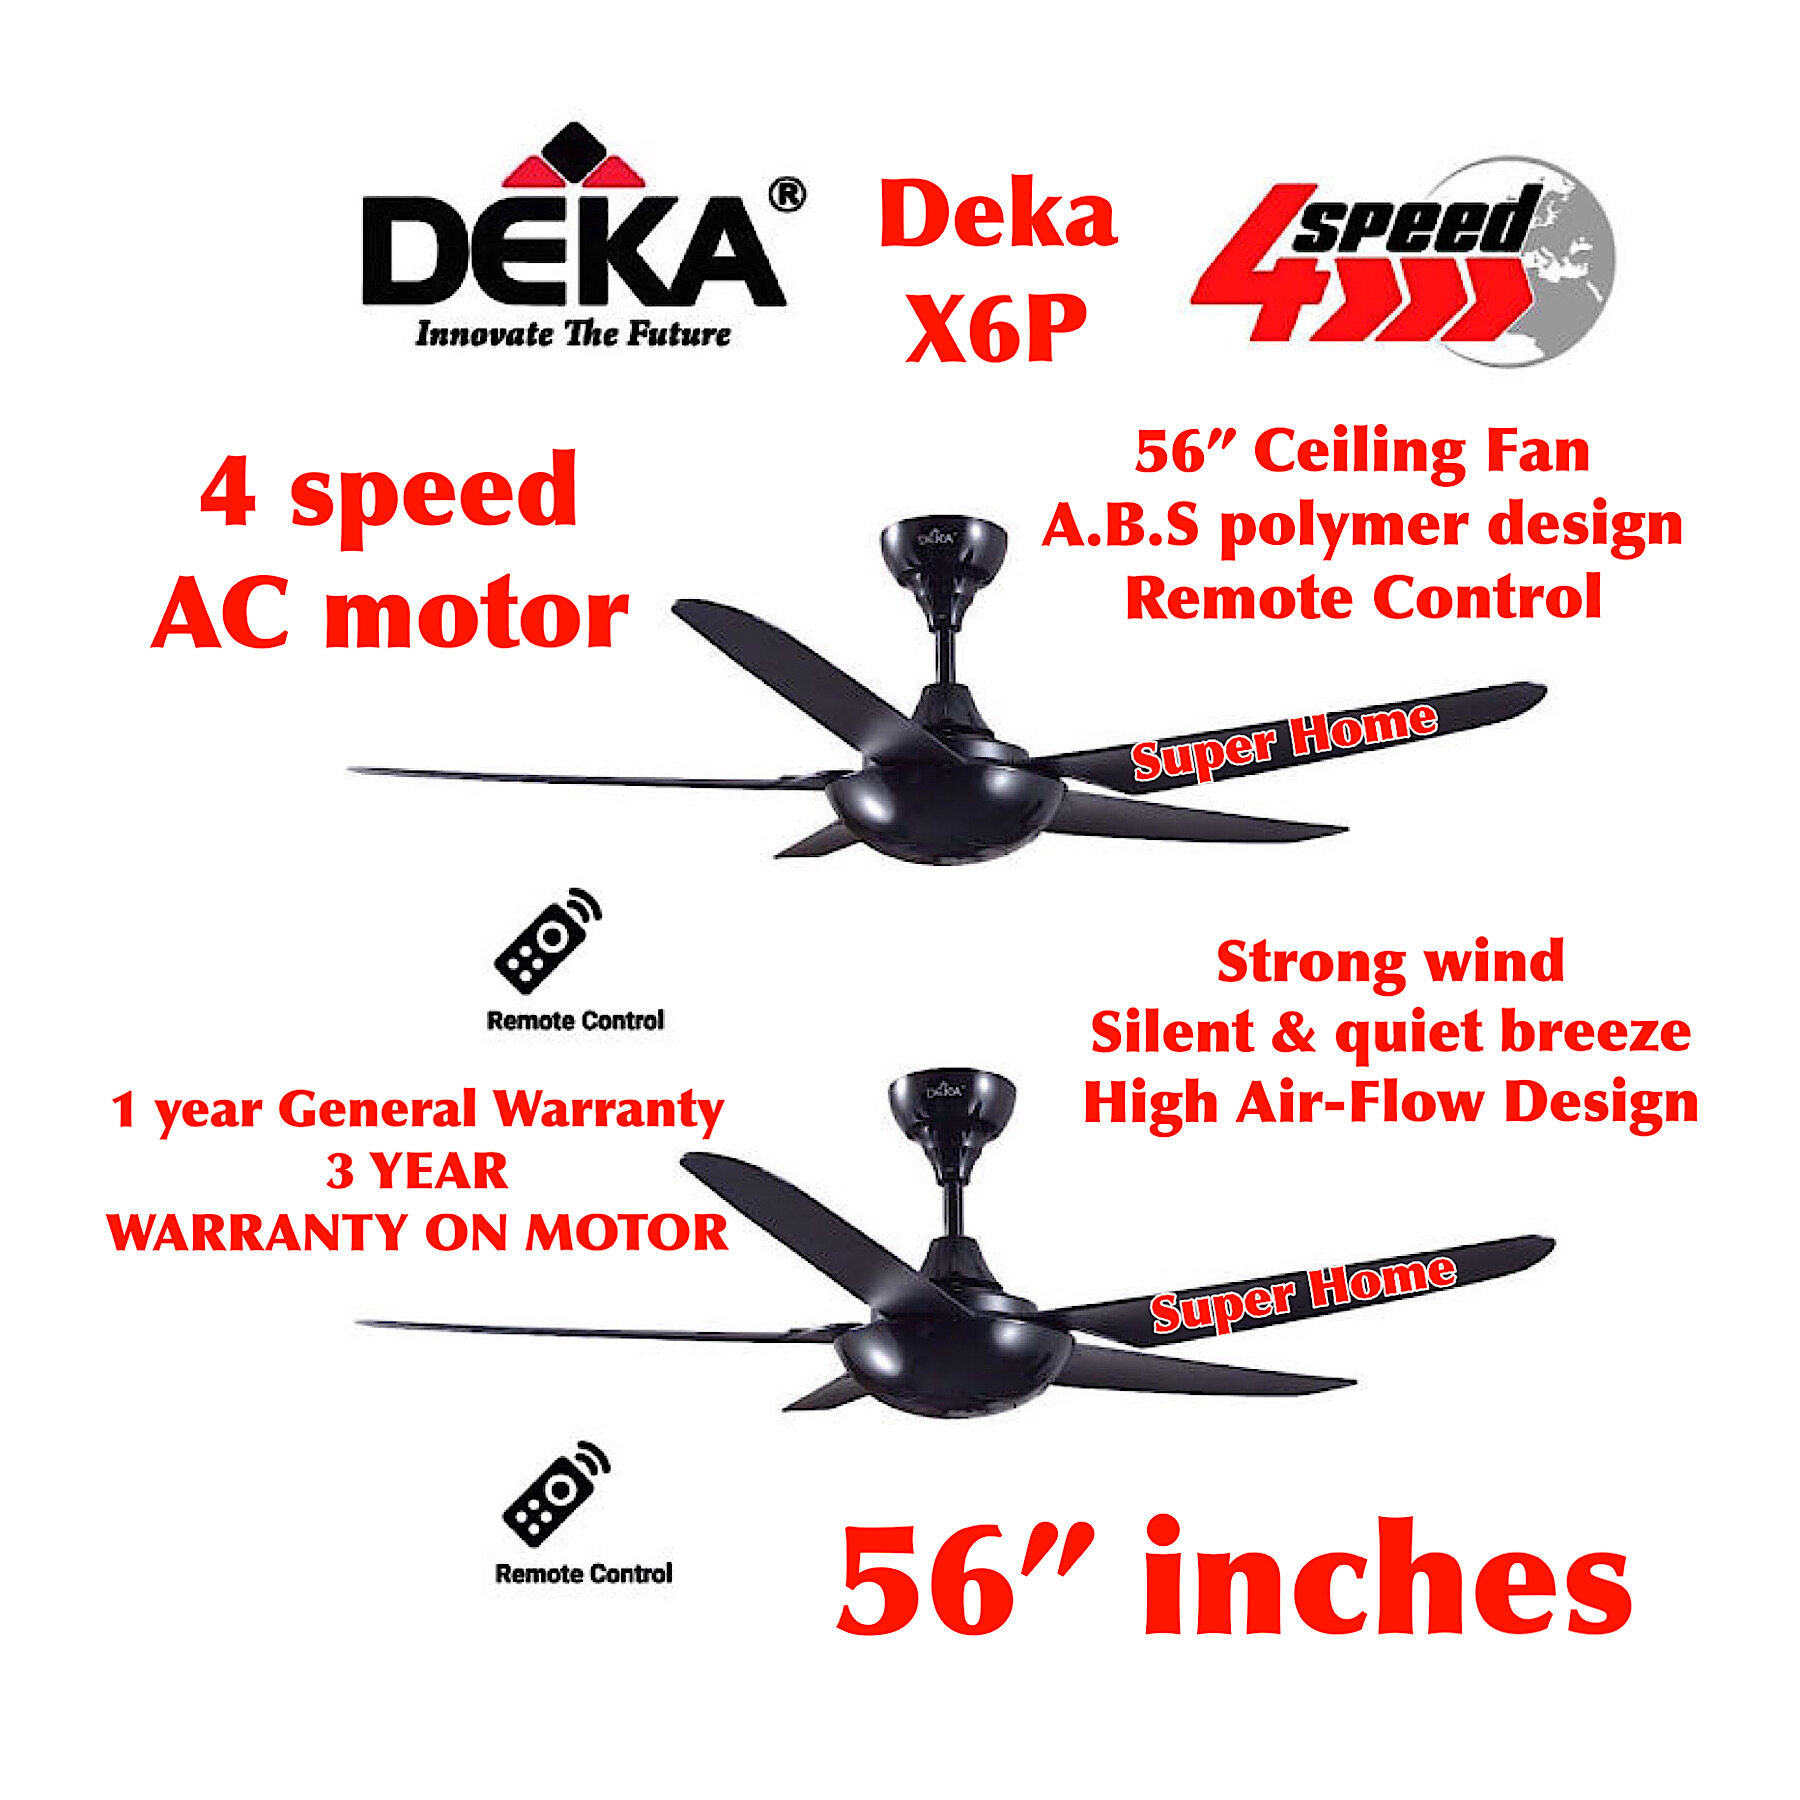 [2 unit] Deka X6P 56 inch 4 Speed Ceiling Fan With Remote Control - 5 Blades A.B.S Polymer Design (Twin Pack) - Black - 4 speed